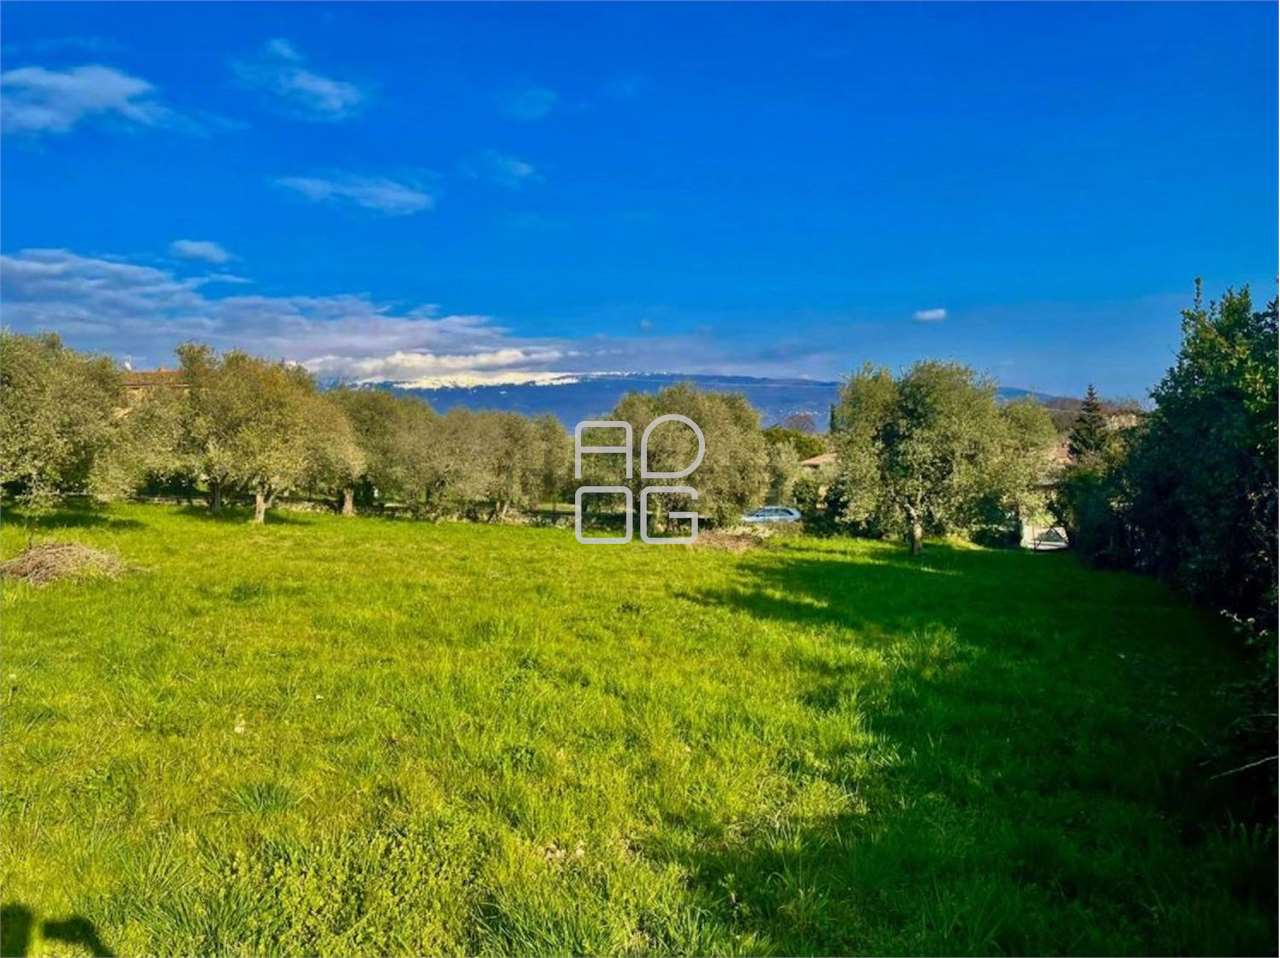 Building plot in hilly area in Toscolano Maderno